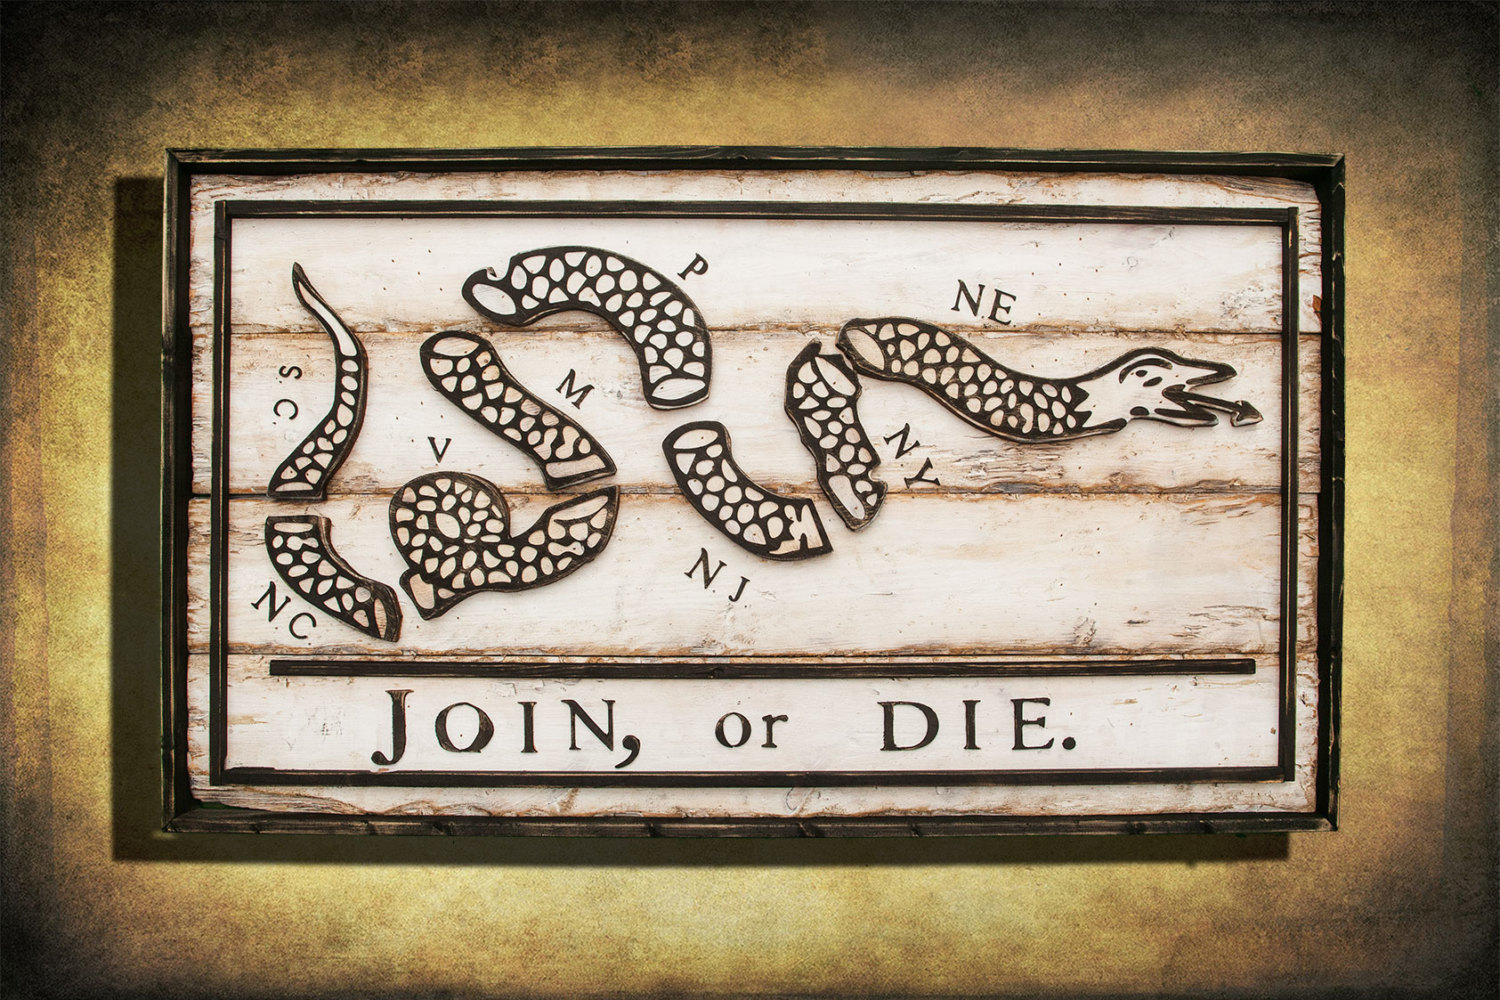 Join or Die Flag, Limited Edition, Weathered Wood One of a kind ,vintage, art, distressed, weathered, recycled, snake, white